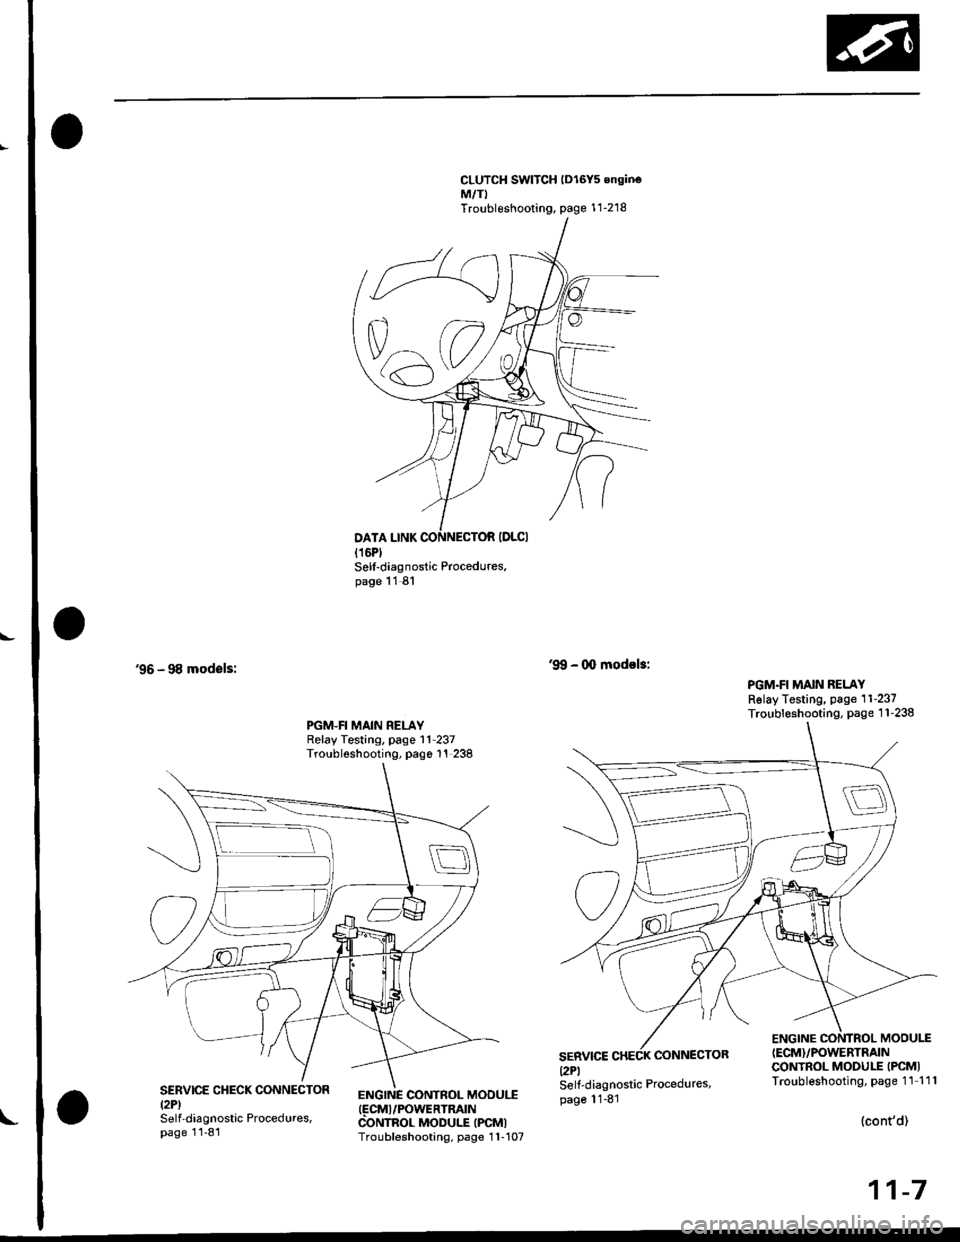 HONDA CIVIC 1996 6.G Workshop Manual I
CLUTCH SWITCH lDl6Y5 onginoM,/TITroubleshooting, page 1 1-218
96 - 98 modsls:
Sell-diagnostic Procedures.page 11 81
ENGINC CONTROL MOOUI.T(FCMI/POWERTRATN
CONTROL MODULE IPCMITroubleshooting, page 